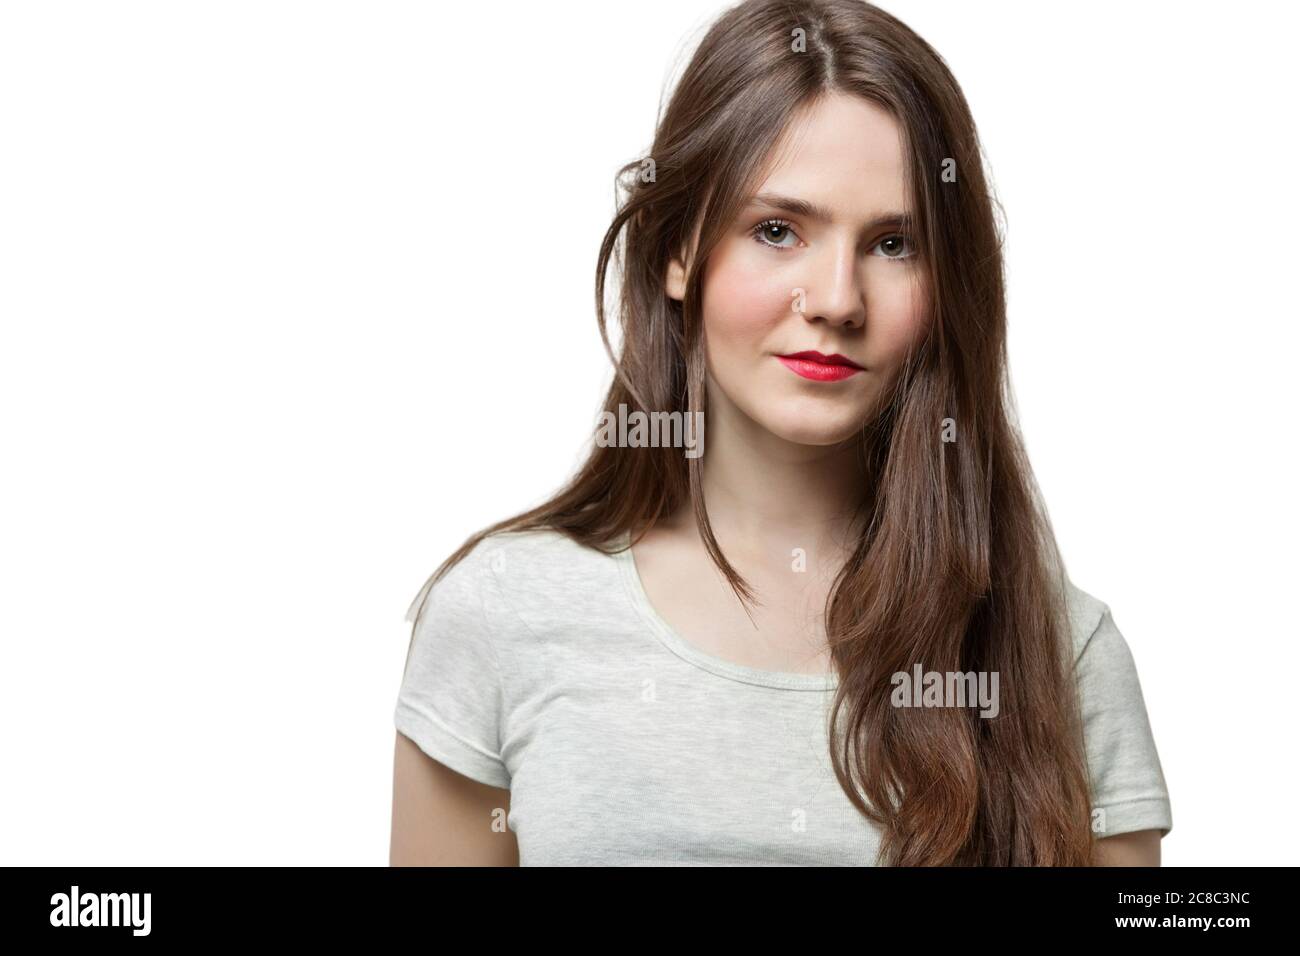 Attractive brunette woman with make up Stock Photo